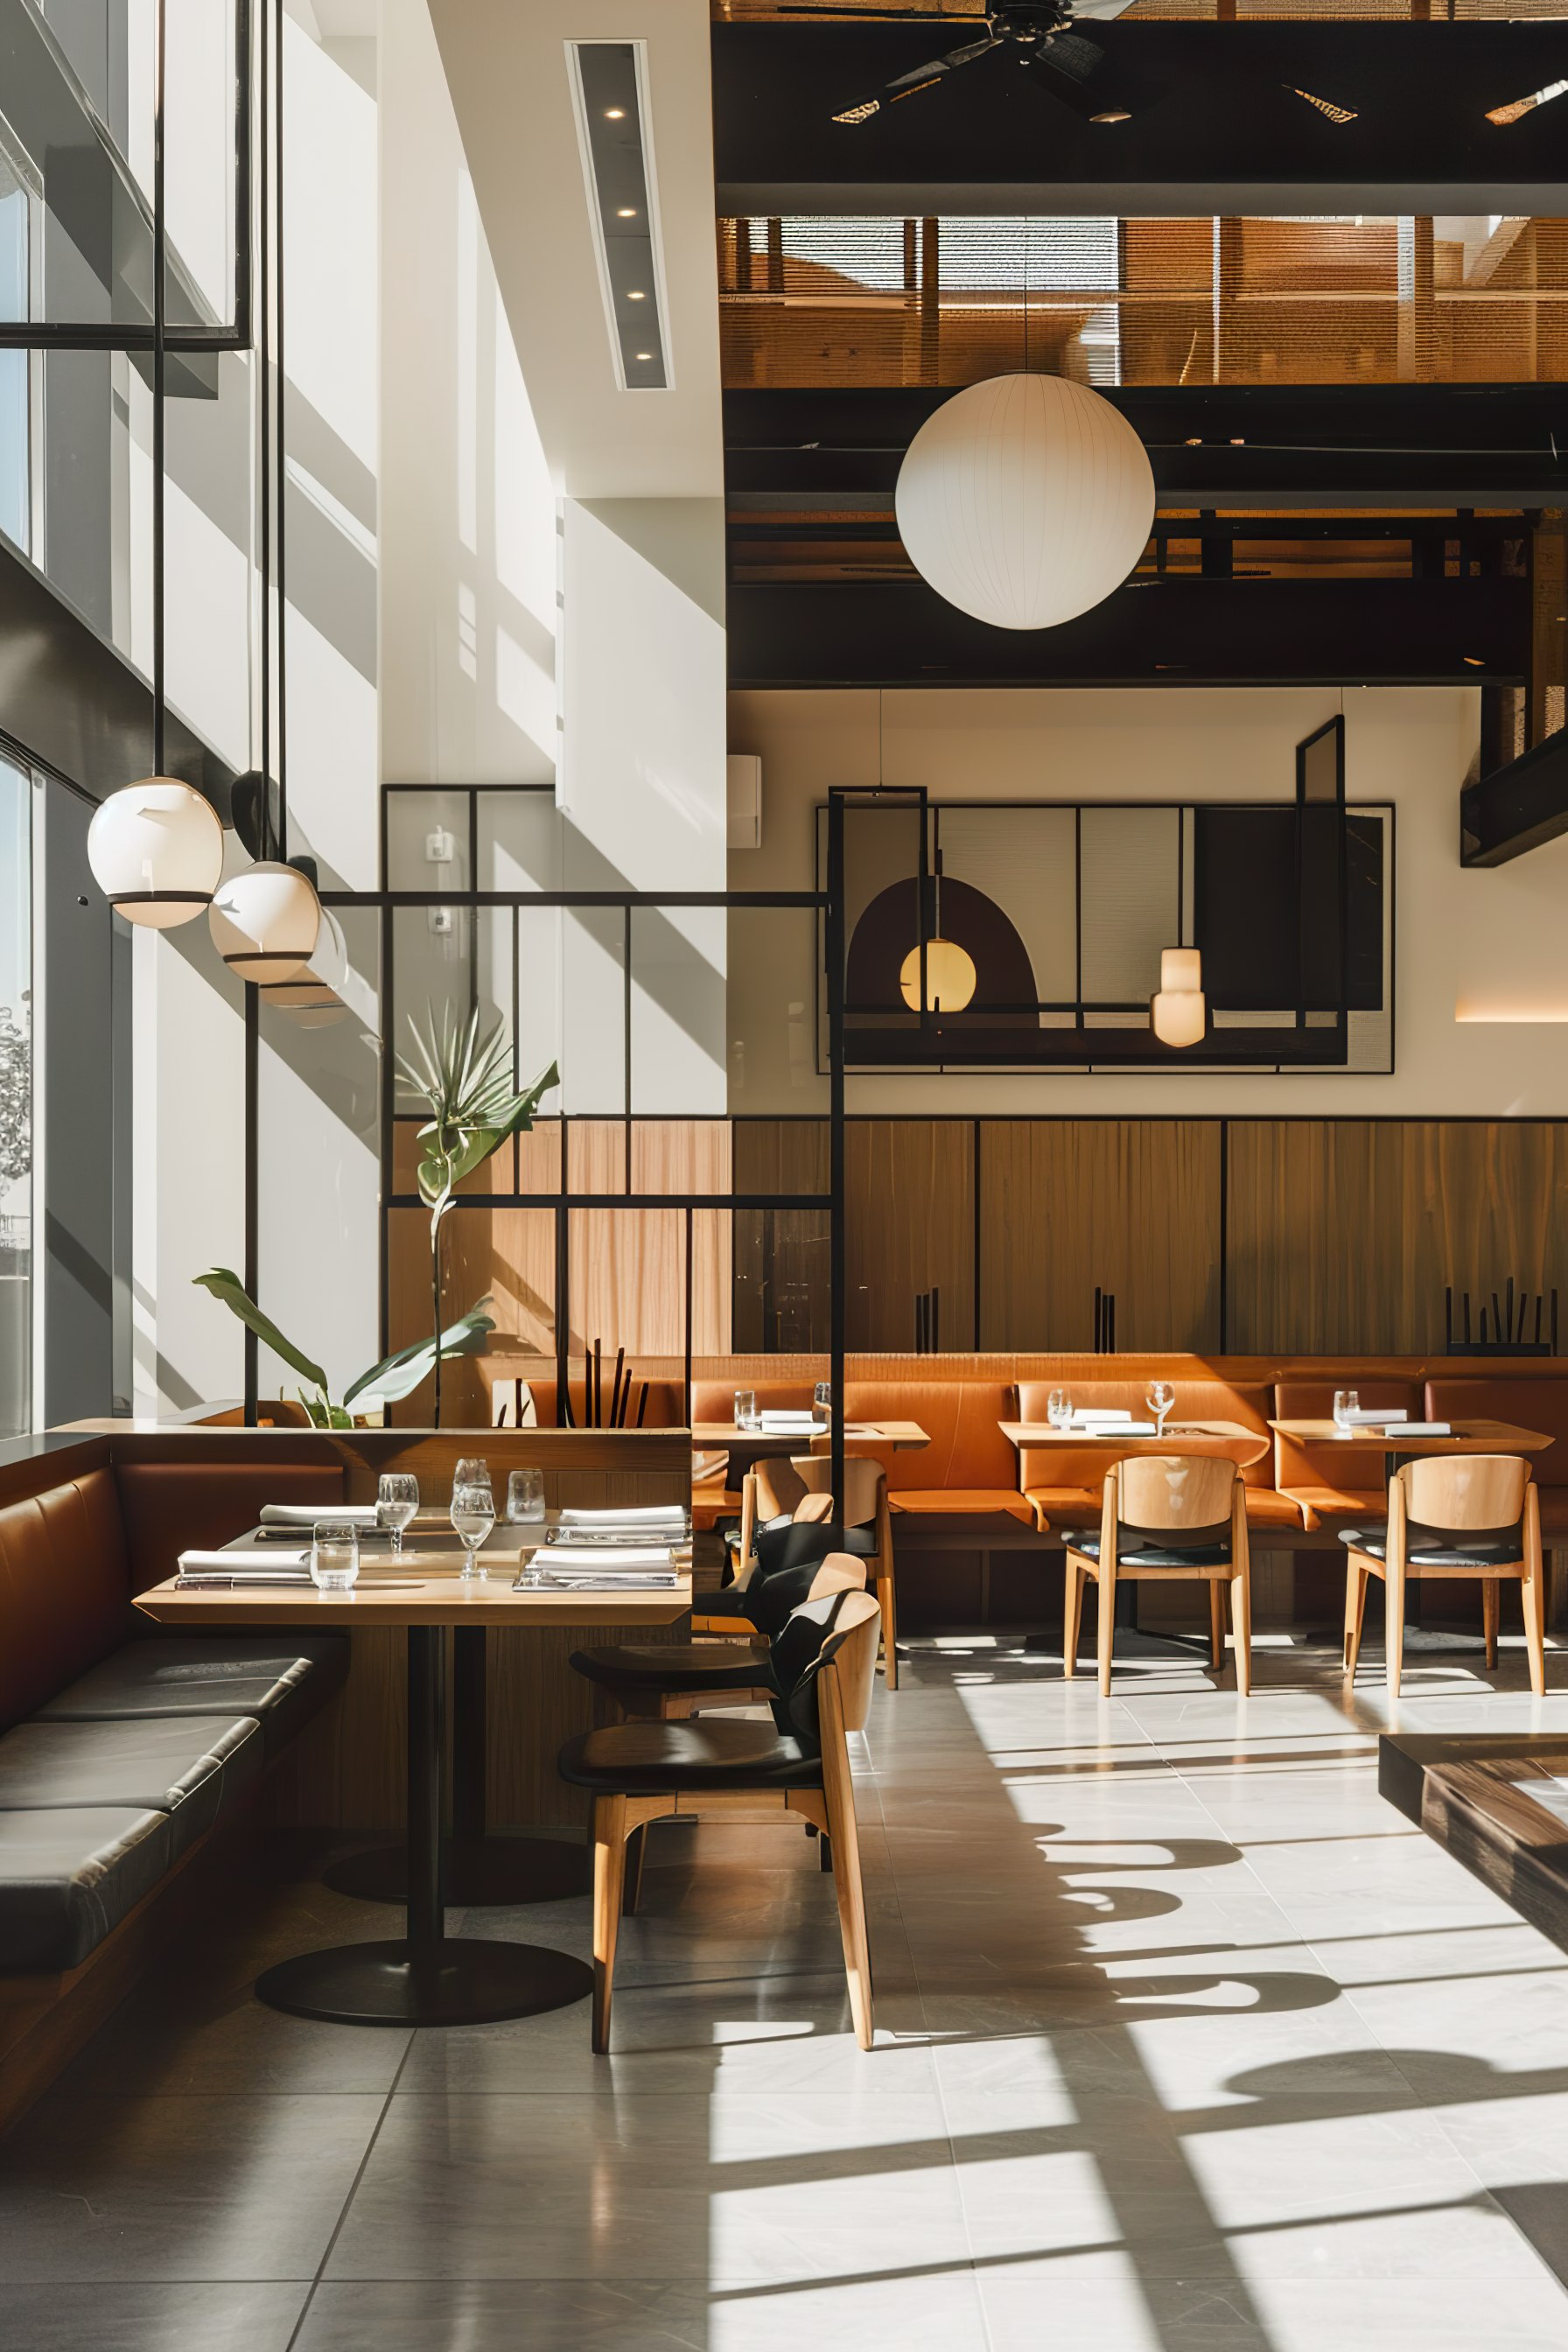 Modern restaurant interior with natural light, warm wood tones, and stylish furnishings.